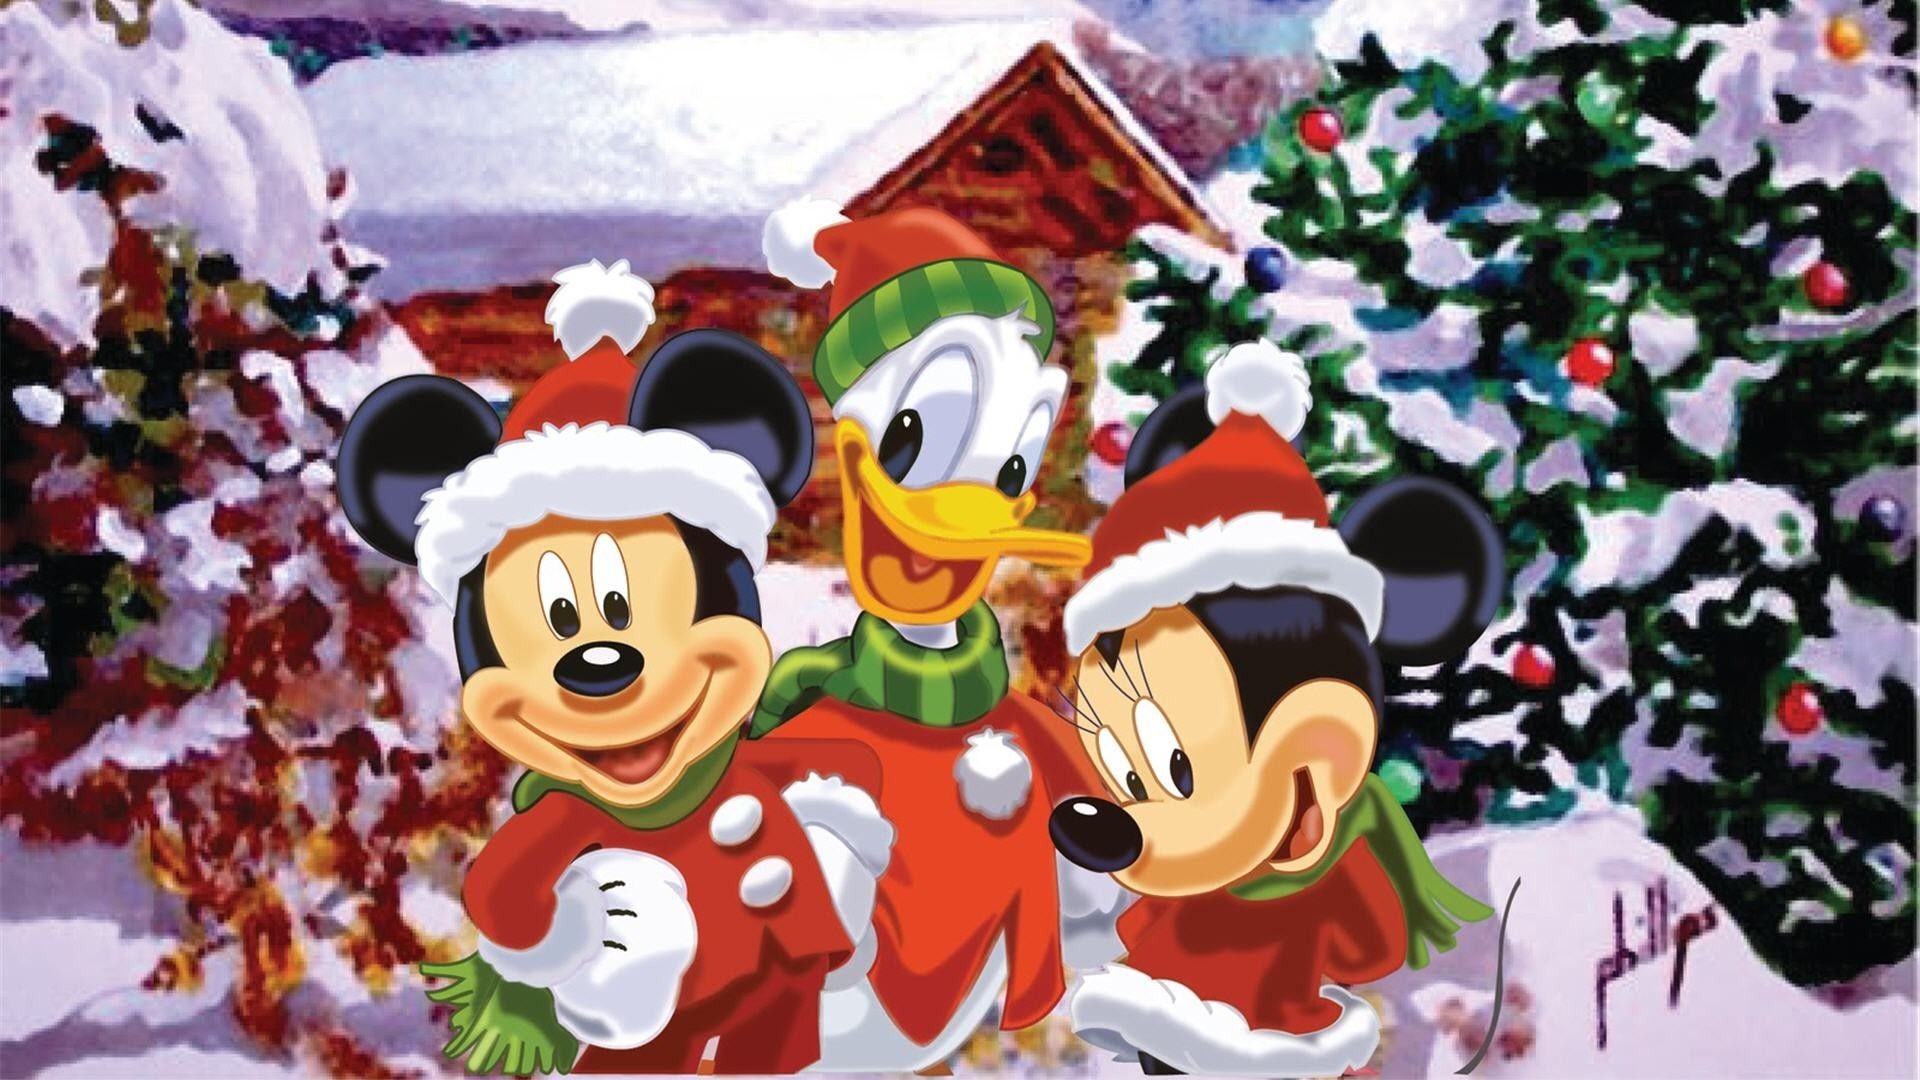 1920x1080 Wallpapers Mickey Mouse Christmas Wallpaper Background With .